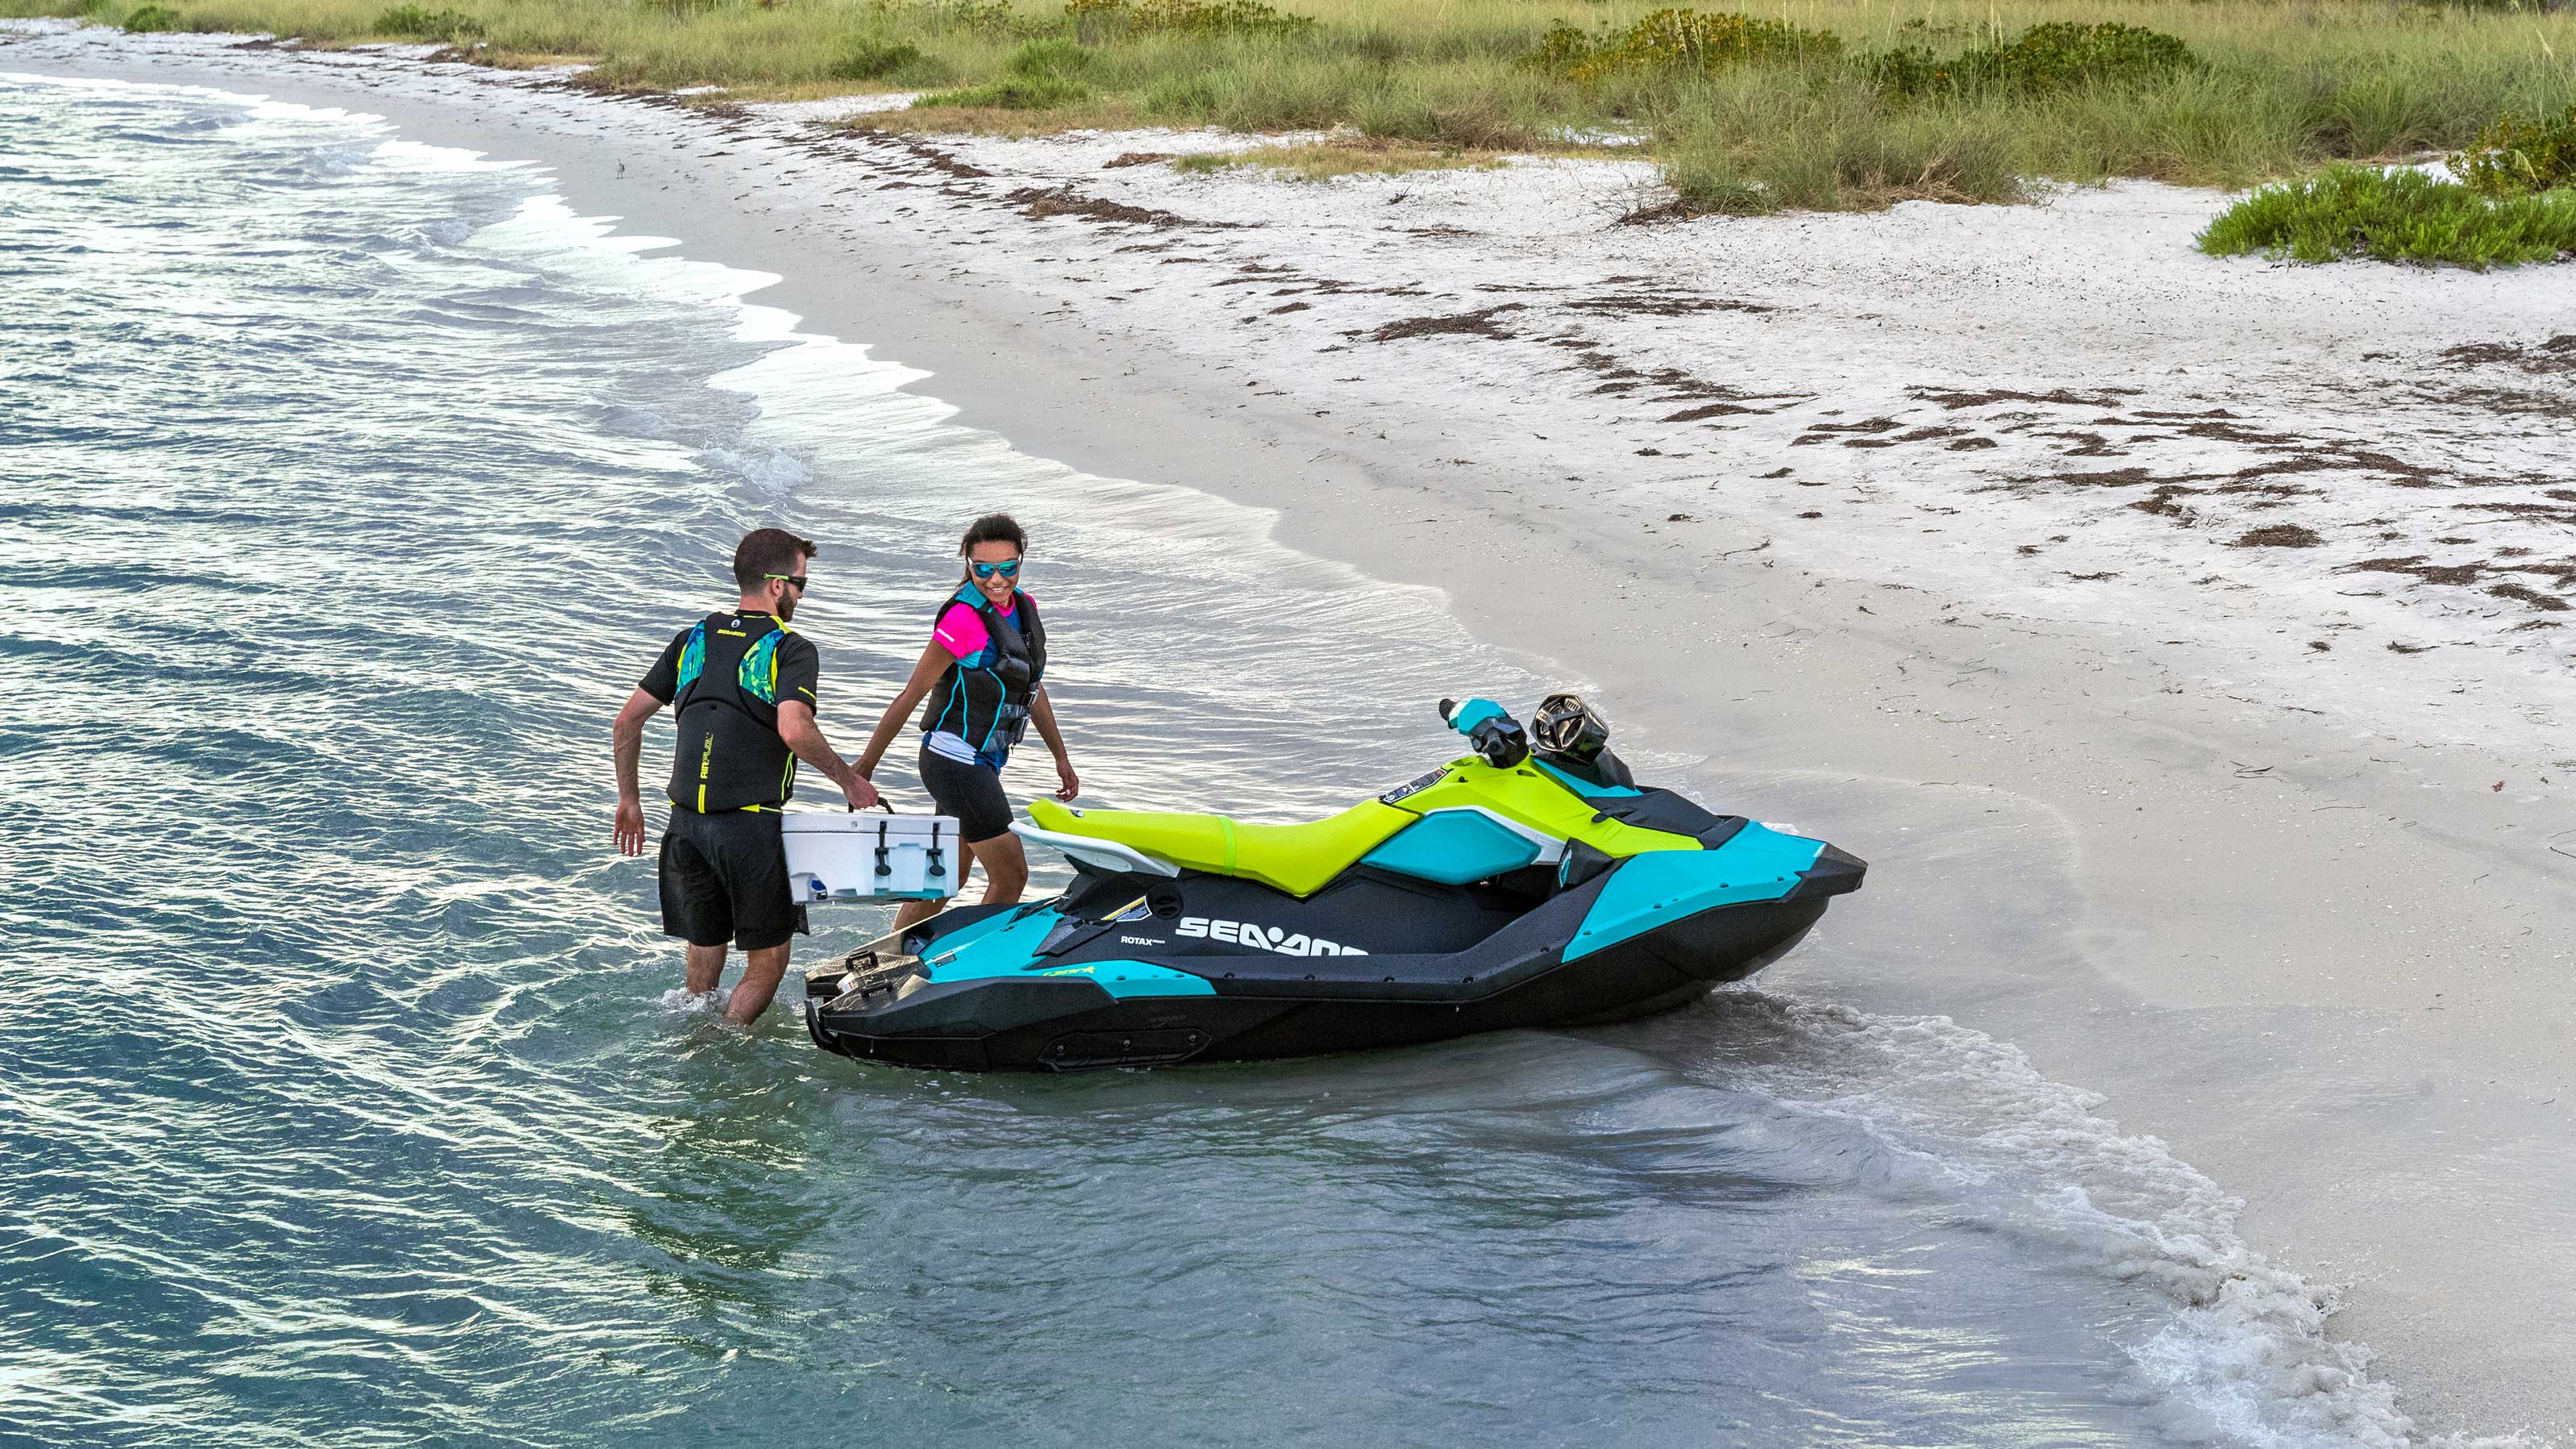 Couple arriving on the beach with their Sea-Doo